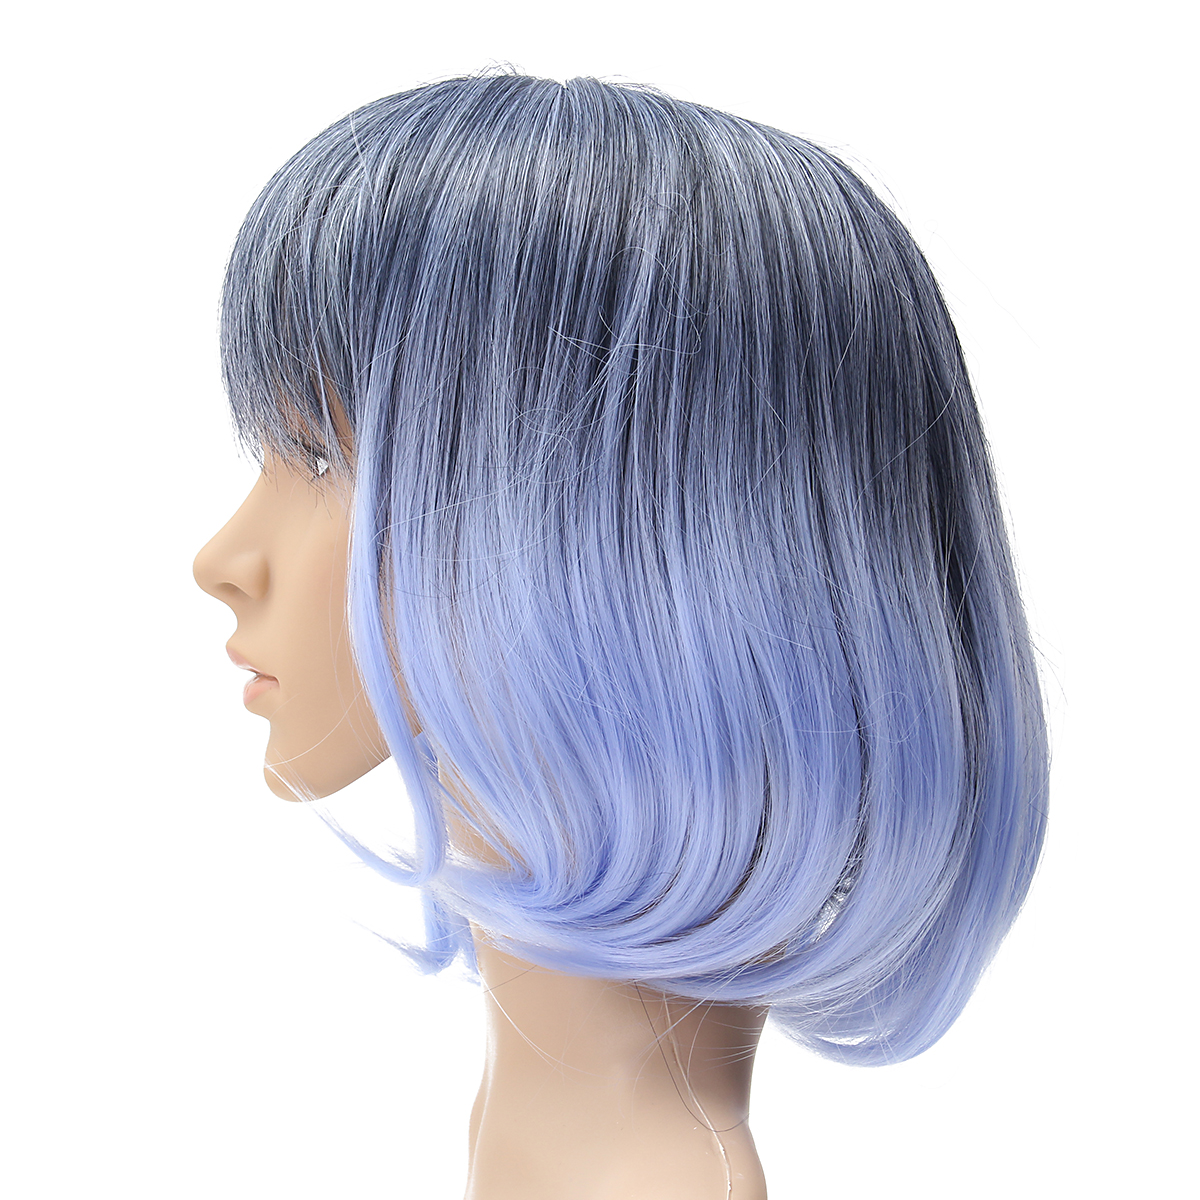 35-40cm-Blue-Gradient-Cosplay-Wig-Woman-Short-Curly-Hair-Anime-Natural-Role-Play-Capless-1133241-3